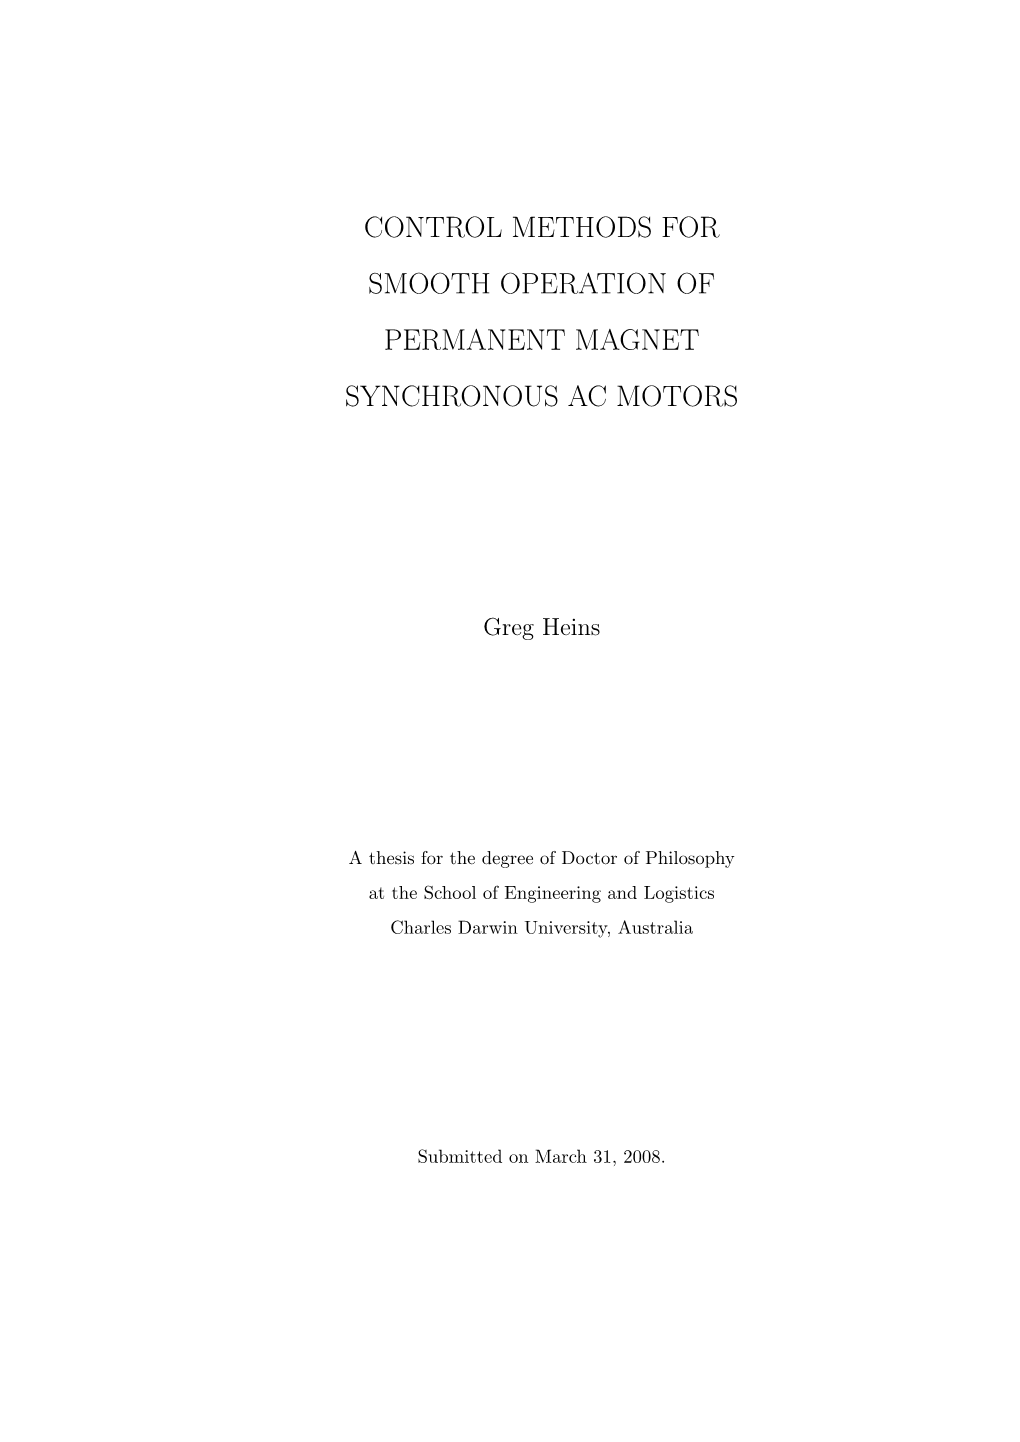 Control Methods for Smooth Operation of Permanent Magnet AC Motors